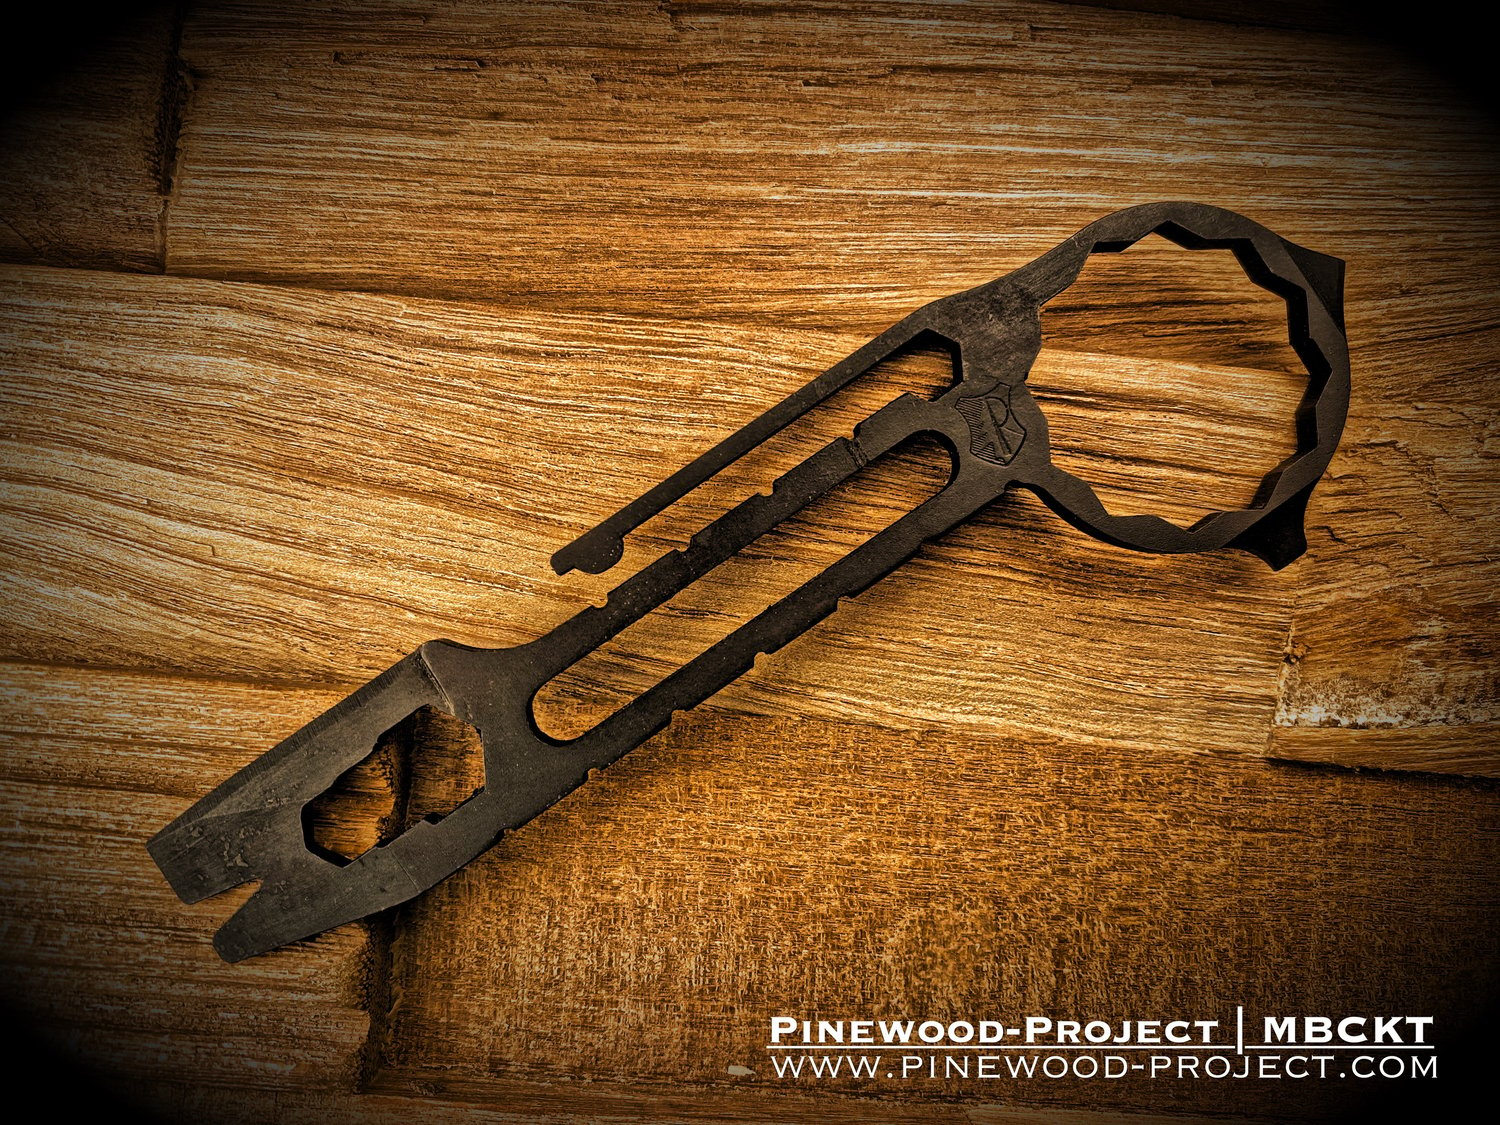 Image of The Wrench - EDC multitool / pocket pry bar